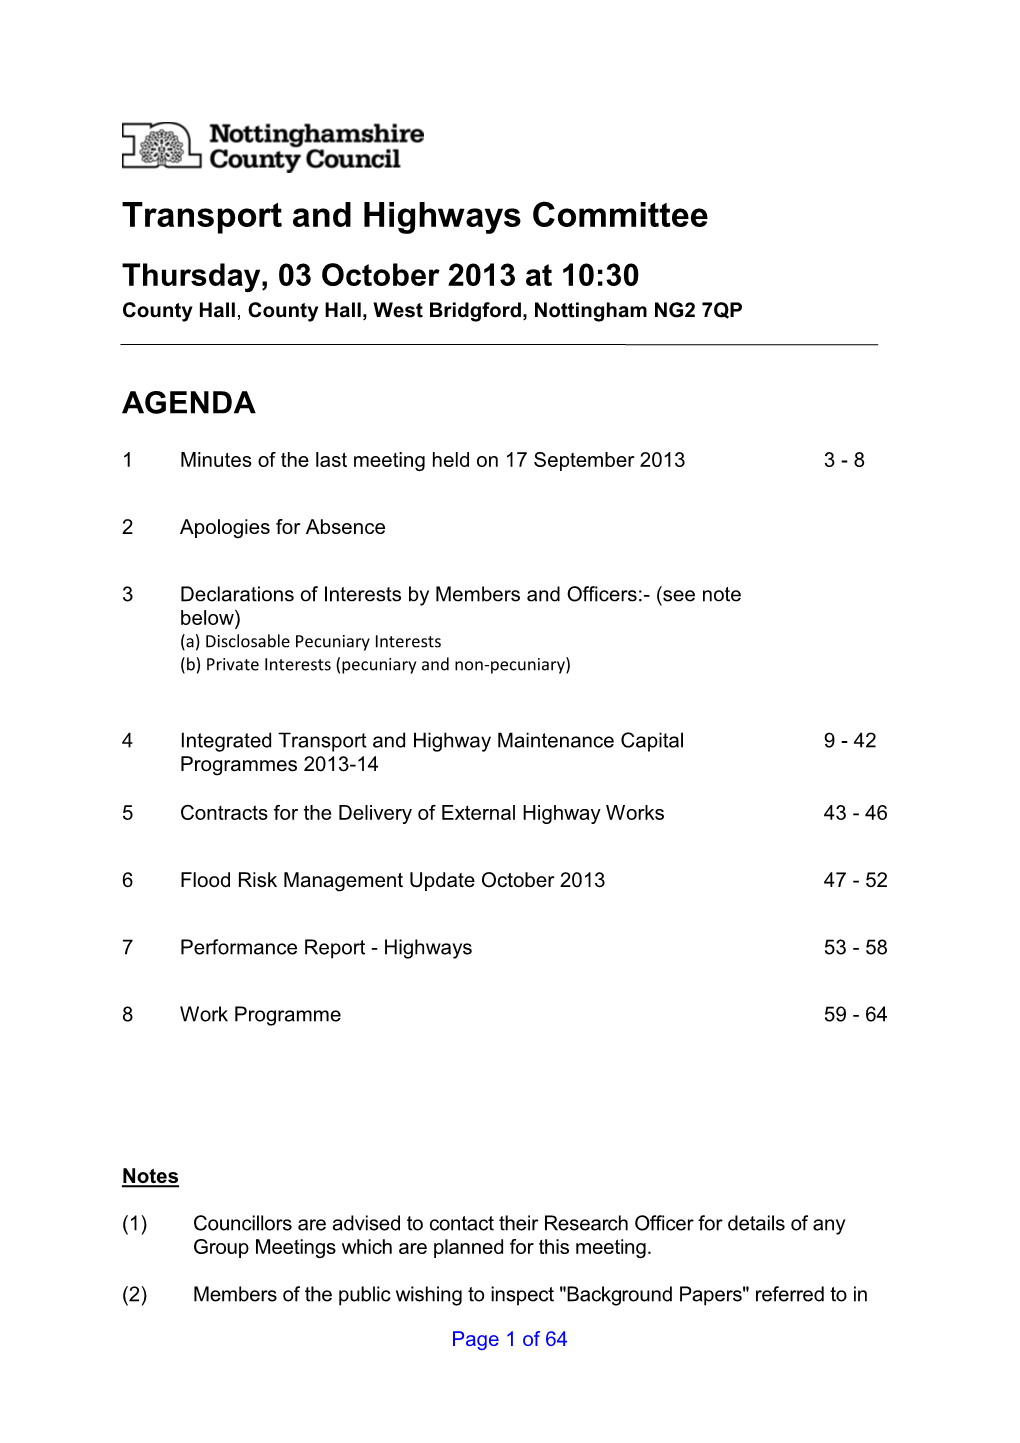 Transport and Highways Committee Thursday, 03 October 2013 at 10:30 County Hall , County Hall, West Bridgford, Nottingham NG2 7QP